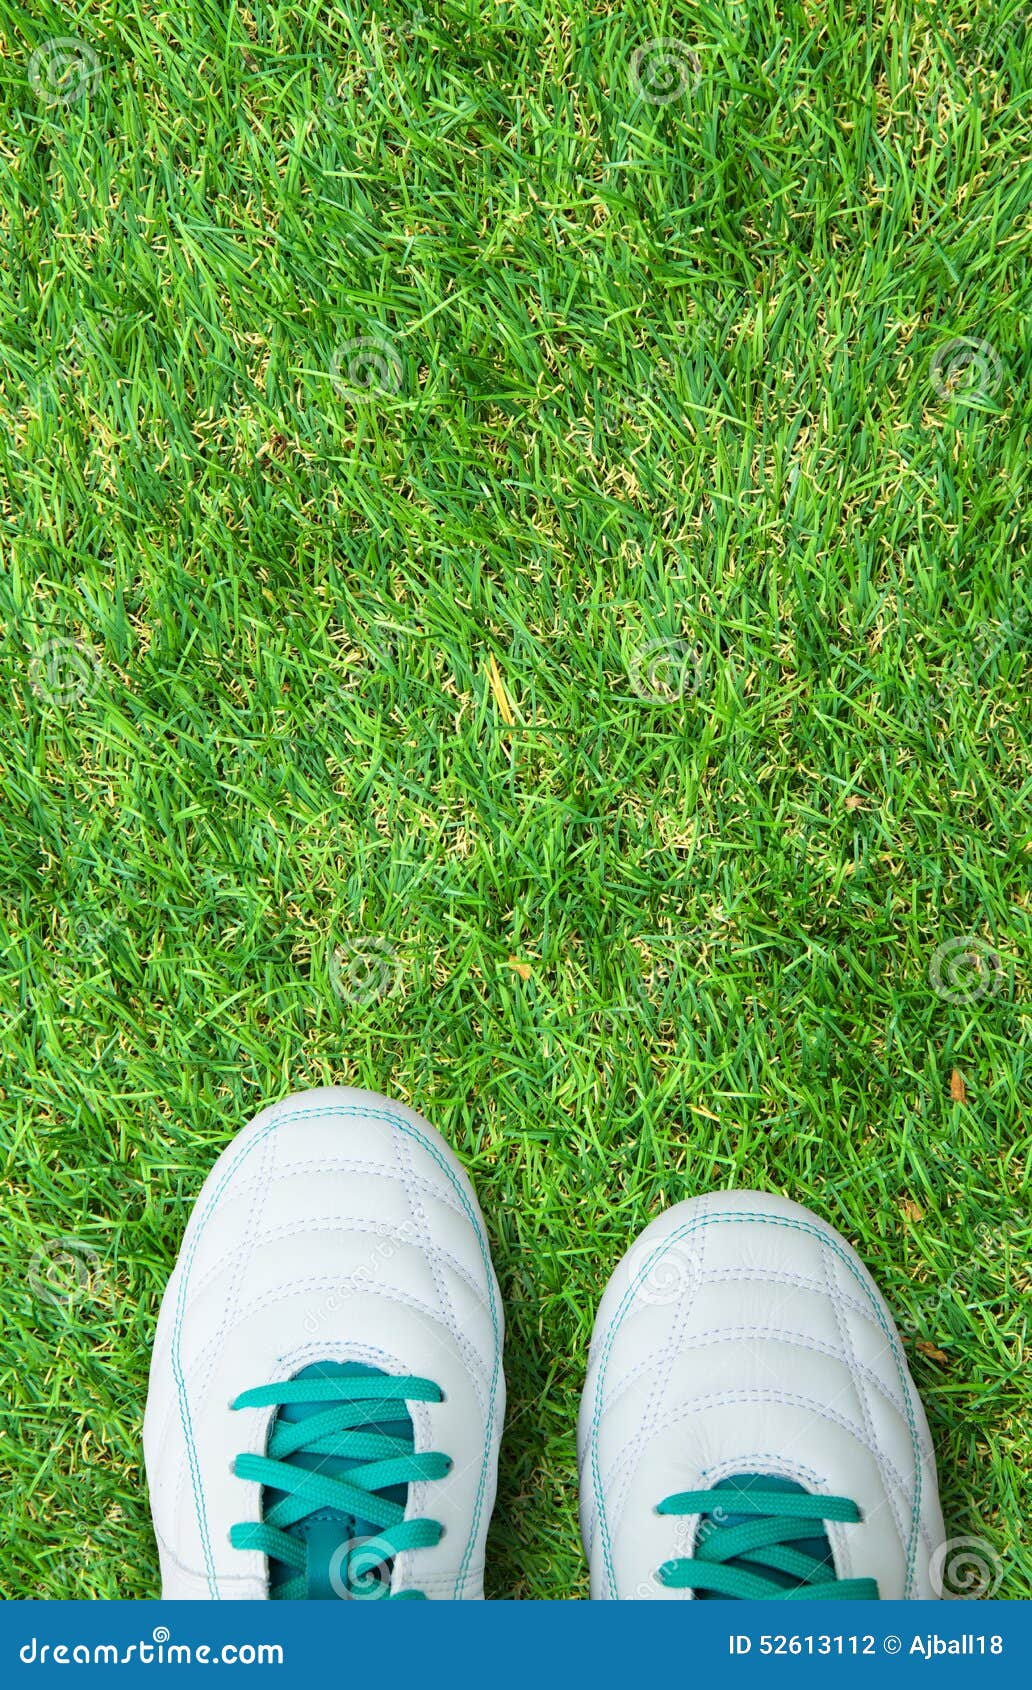 turf soccer shoes on grass